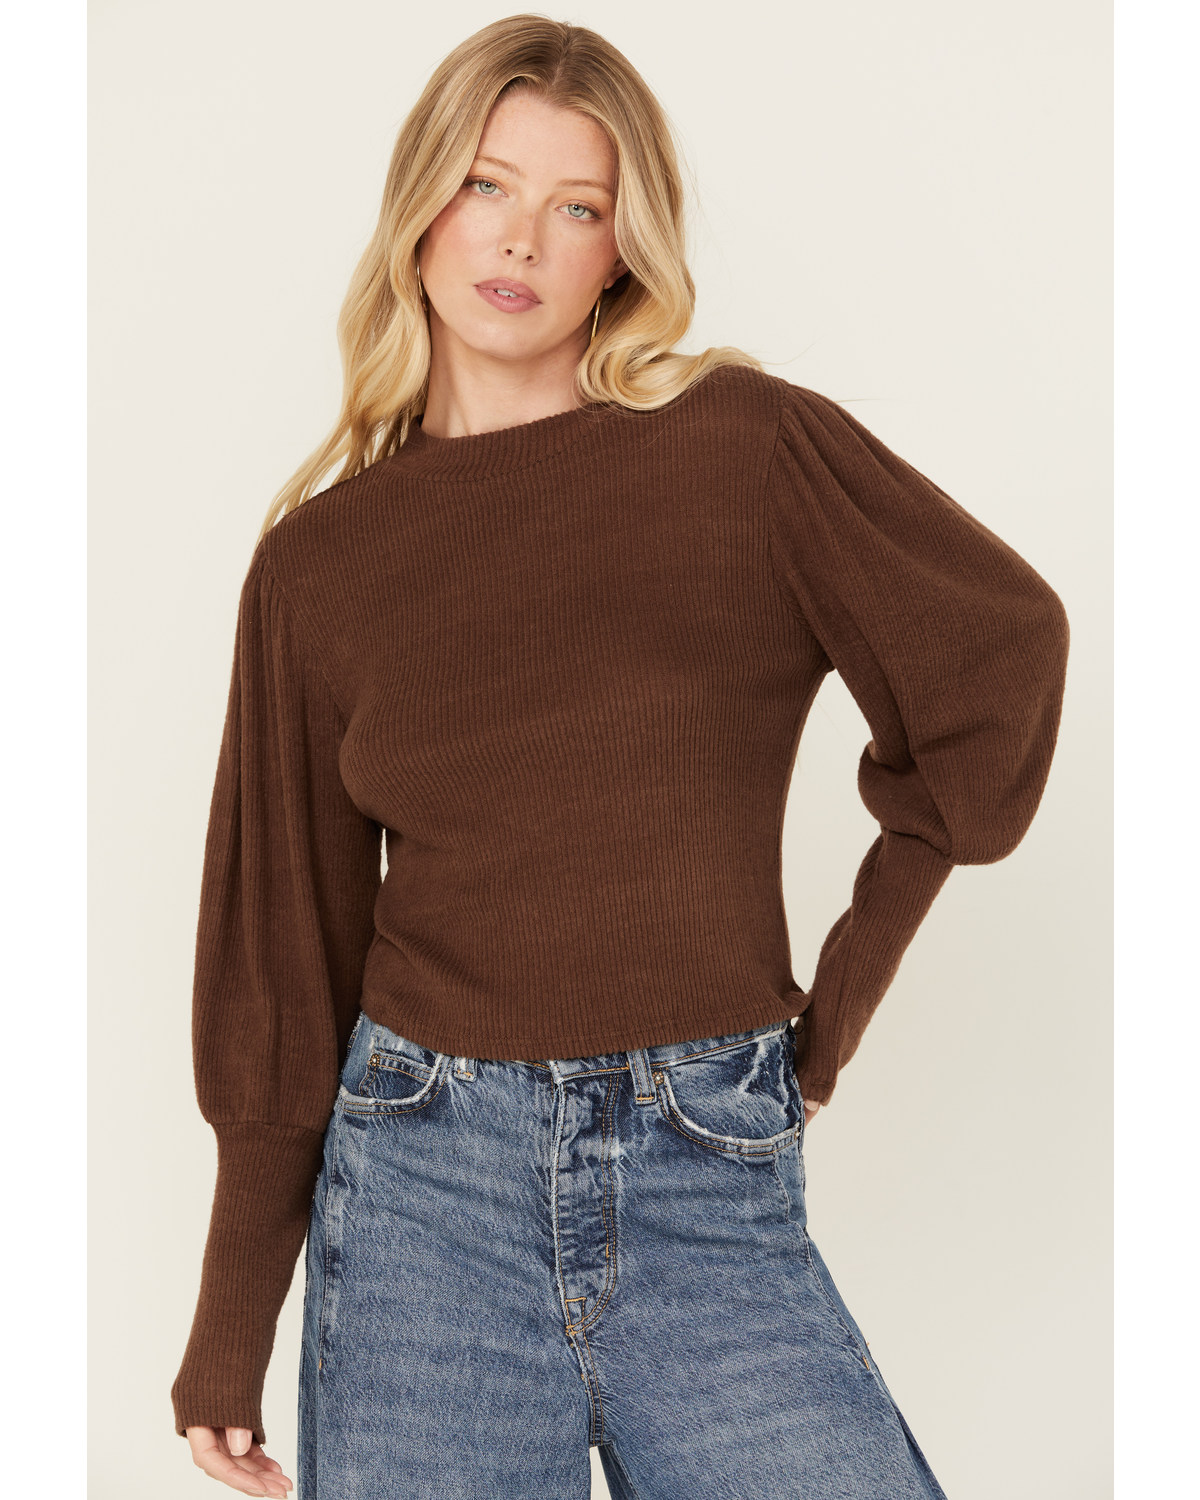 Panhandle Women's Ribbed Moc Neck Puff Long Sleeve Top